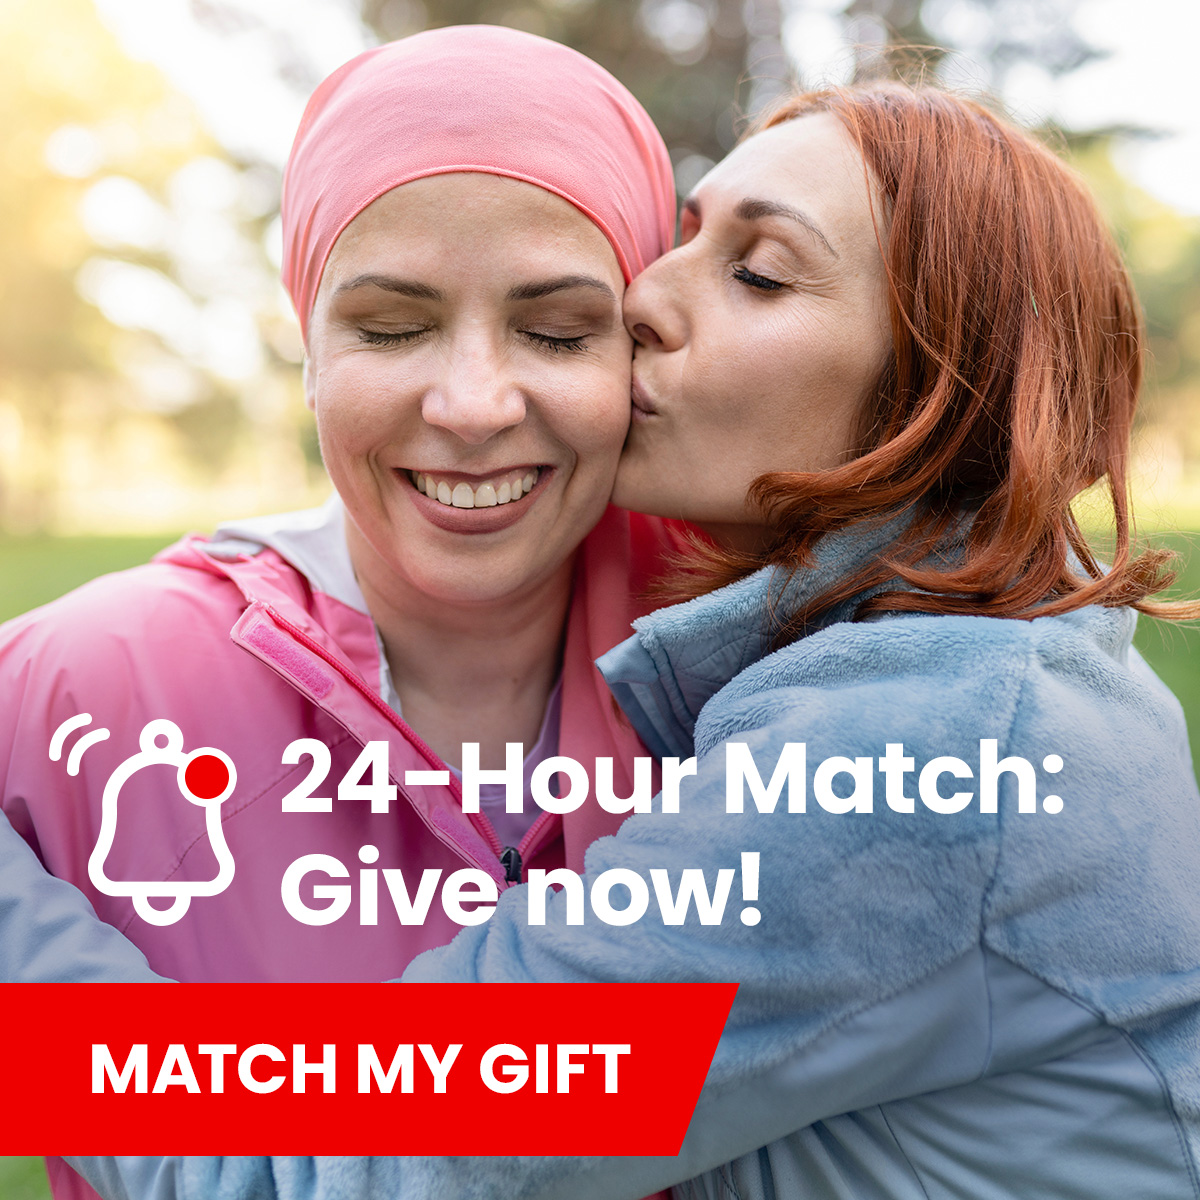 MATCH EXTENDED: There’s still time to make a gift that will be DOUBLED up to $50,000! Your donation before midnight tonight will go twice as far to support groundbreaking cancer research and lifesaving programs. Donate now at amercancer.co/MarMatch